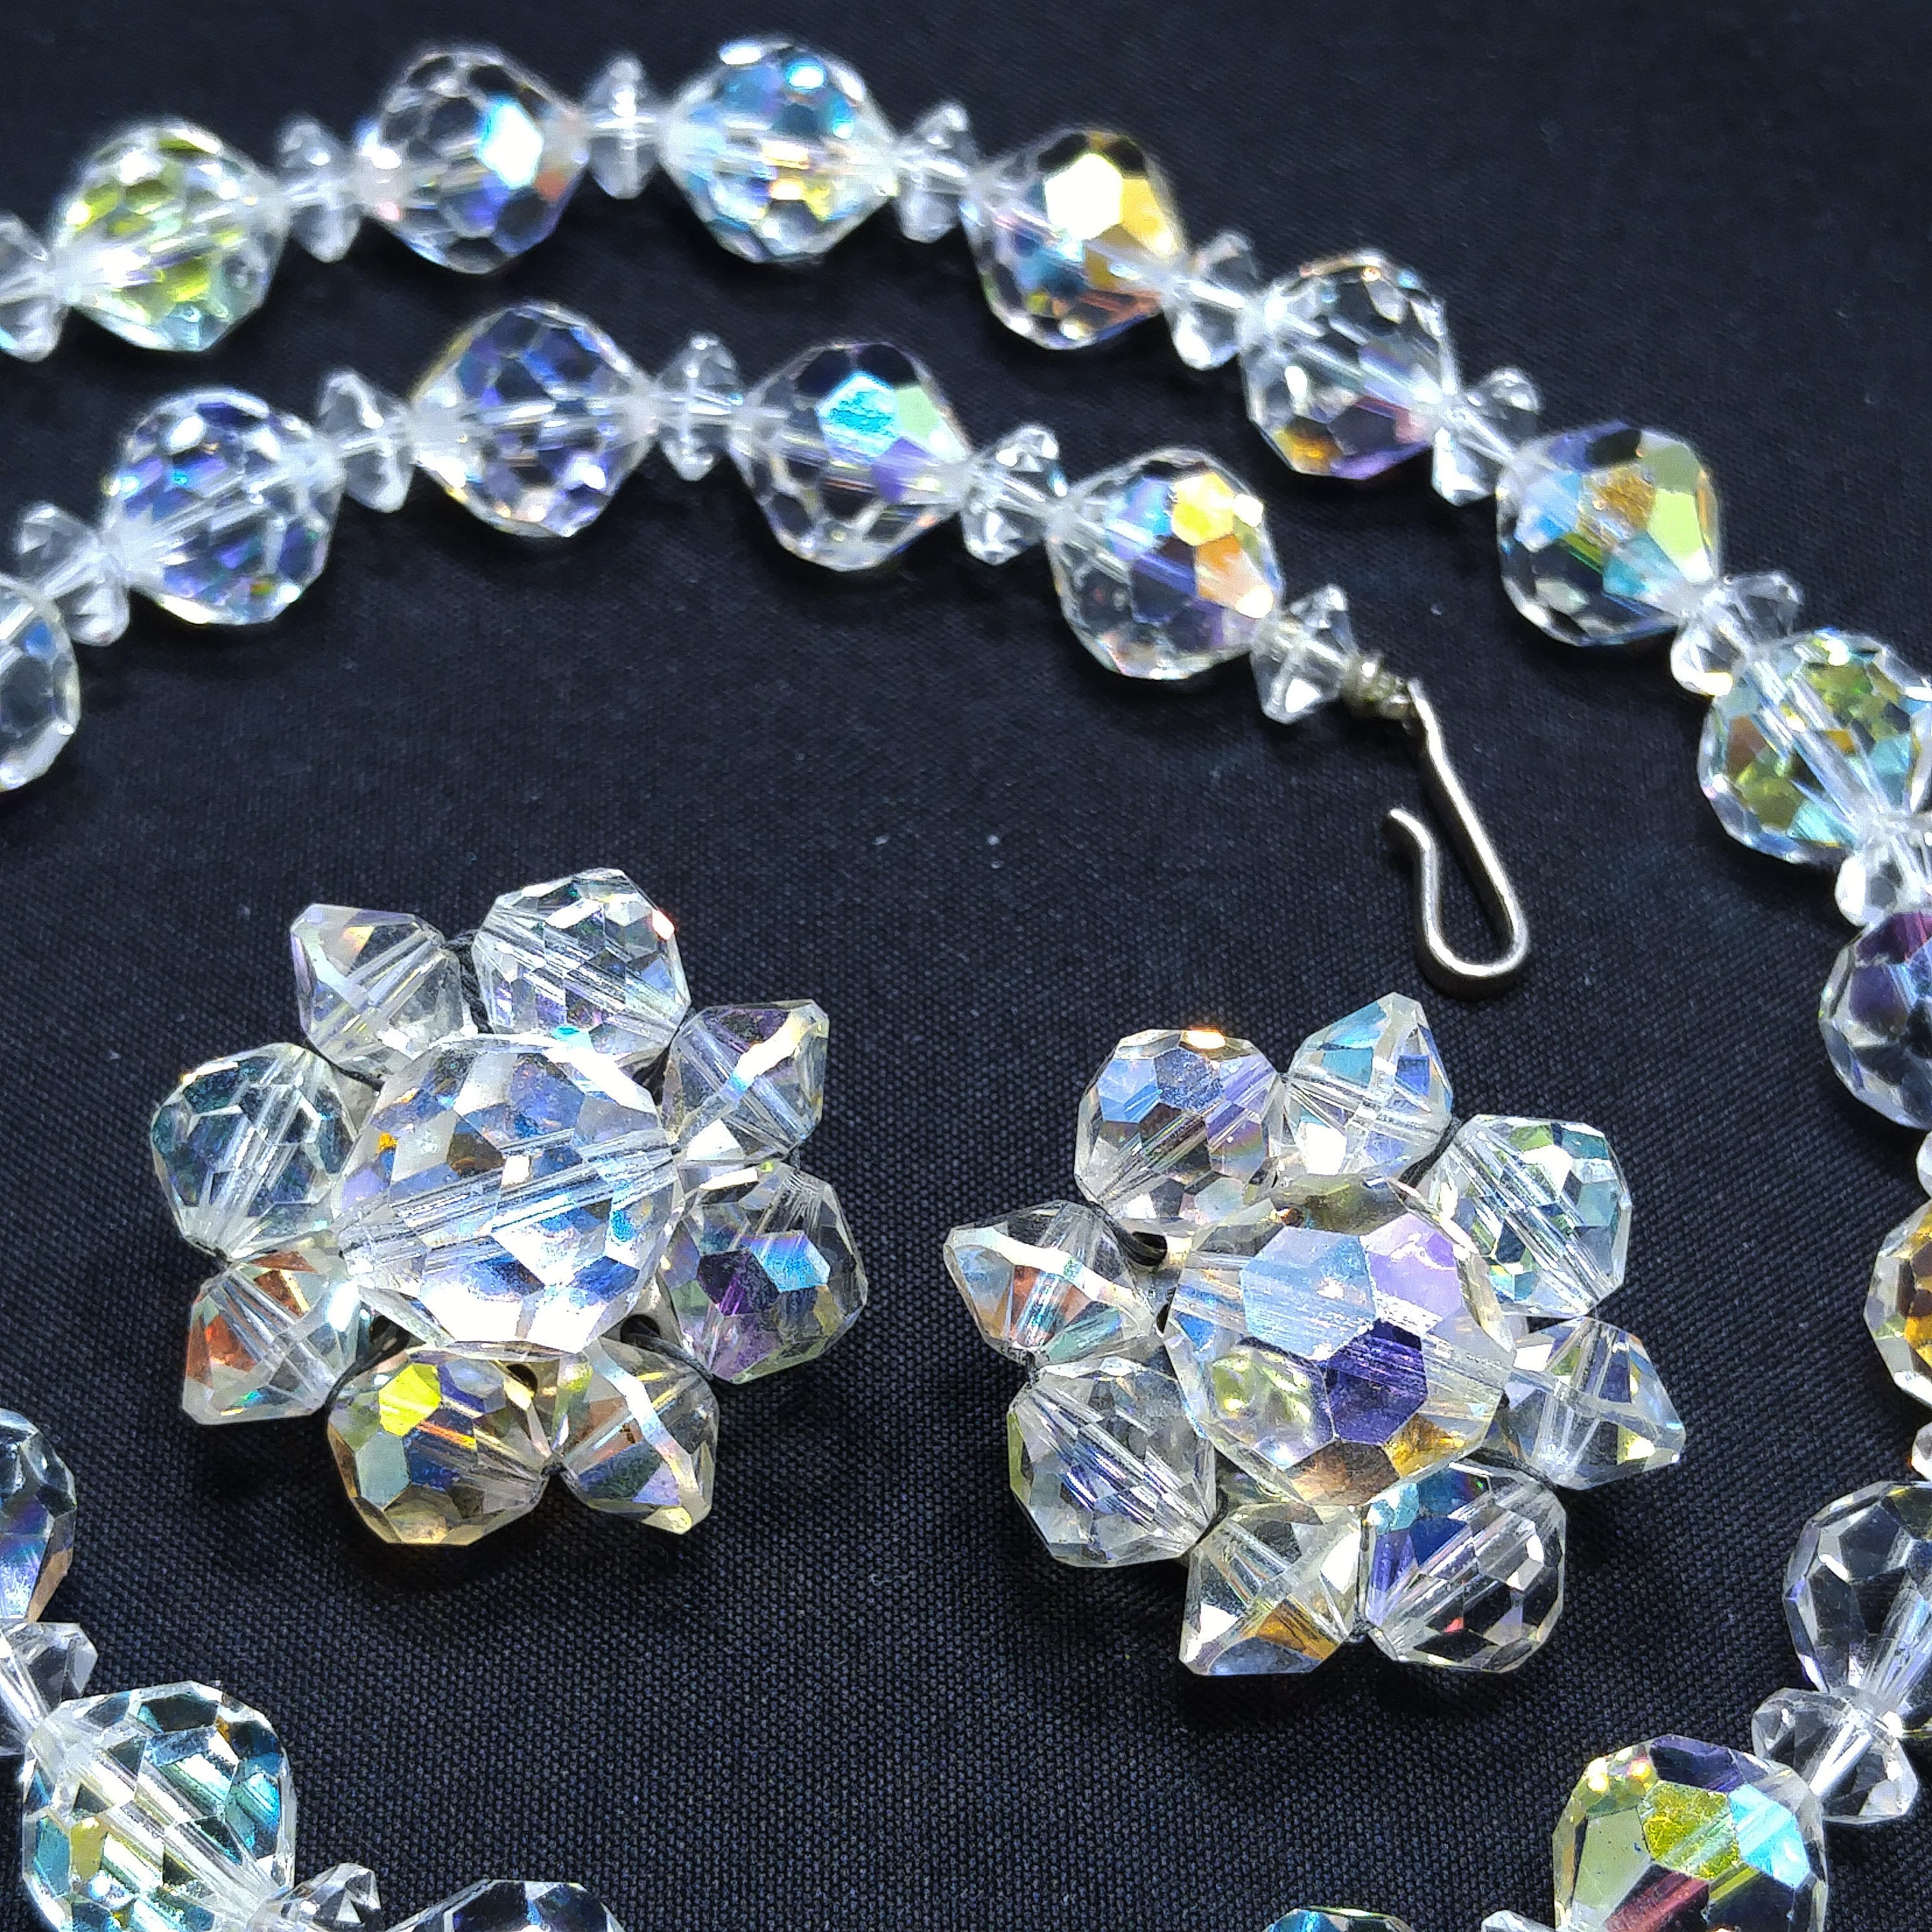 Crystal Clear - Beaded Aurora Set, Vintage Faceted Jewelry Etsy Beads, Earring & Austrian Necklace 1960s Borealis